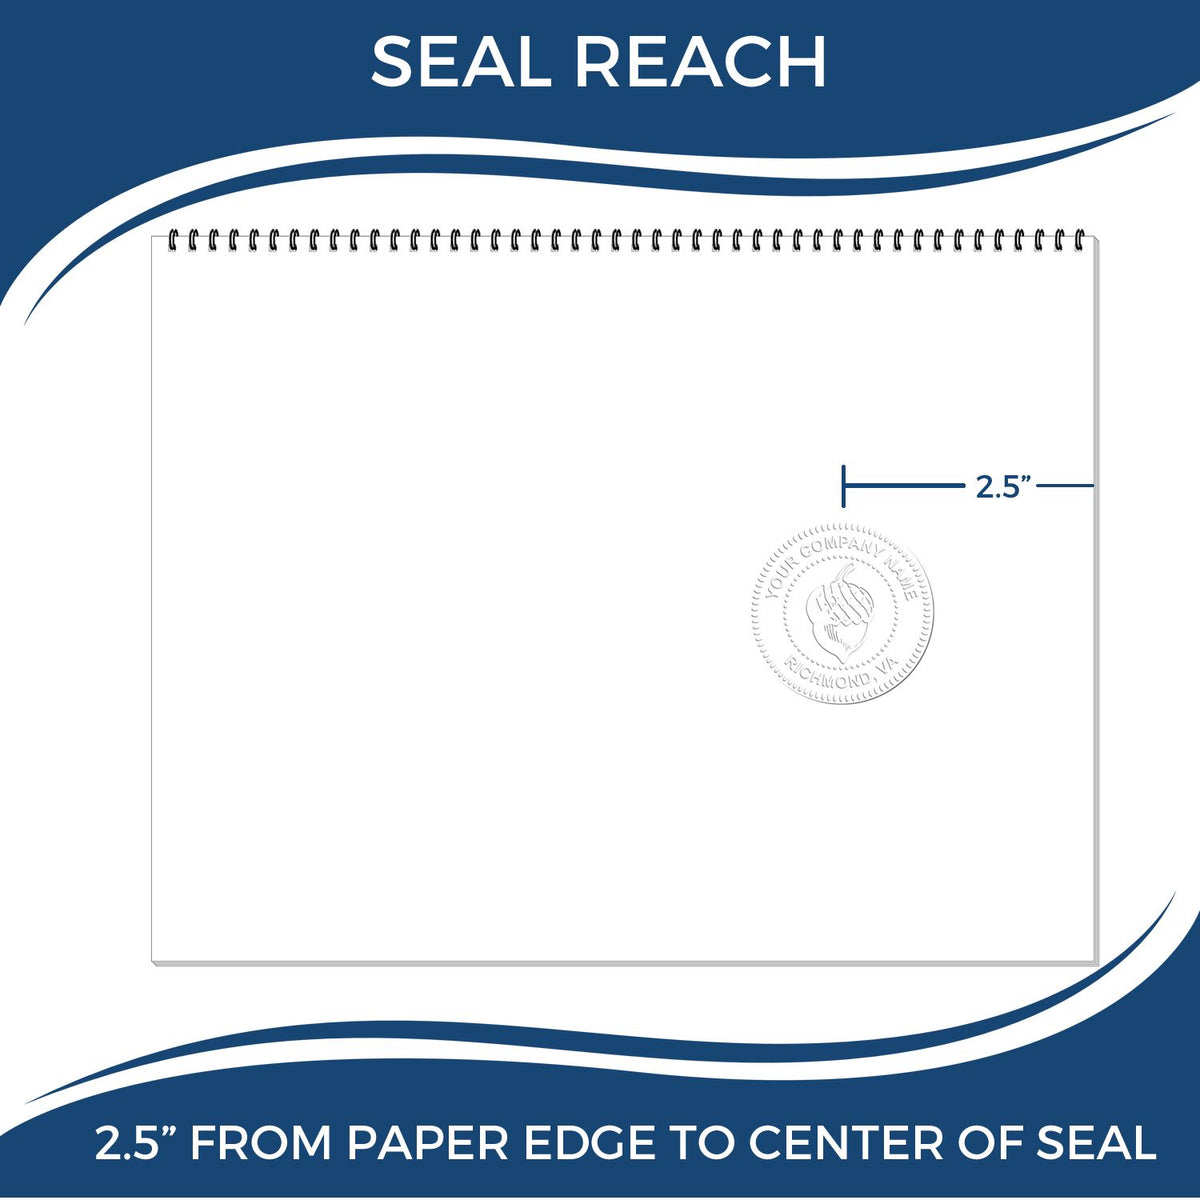 An infographic showing the seal reach which is represented by a ruler and a miniature seal image of the State of Florida Long Reach Architectural Embossing Seal